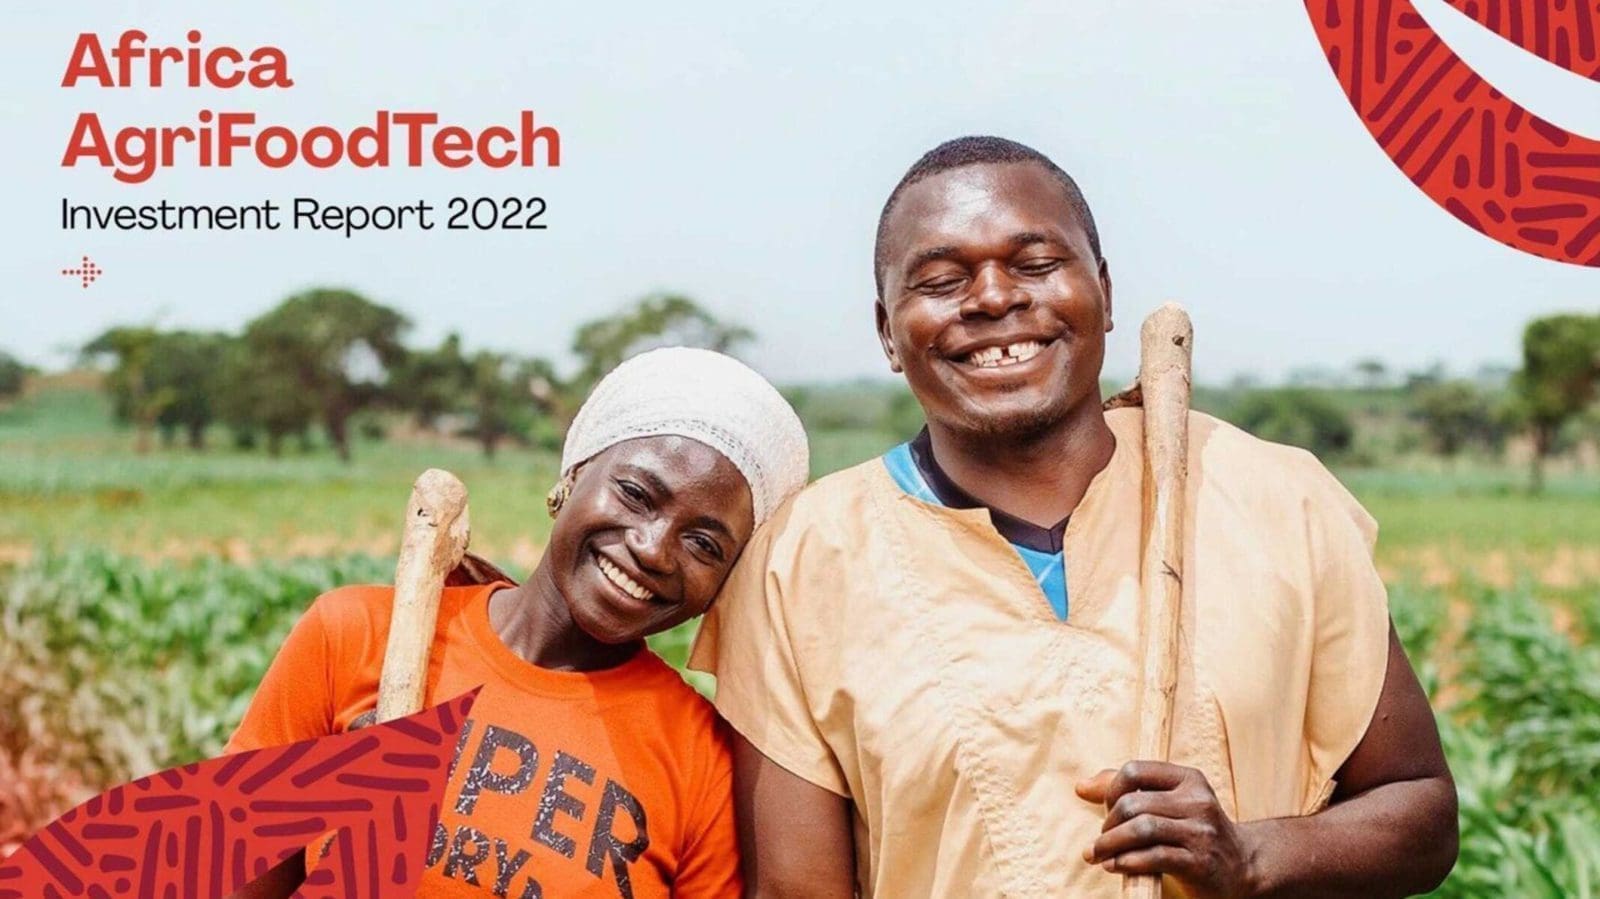 Africa’s agrifood tech startups attain record-breaking 250% growth in venture capital funding in 2021